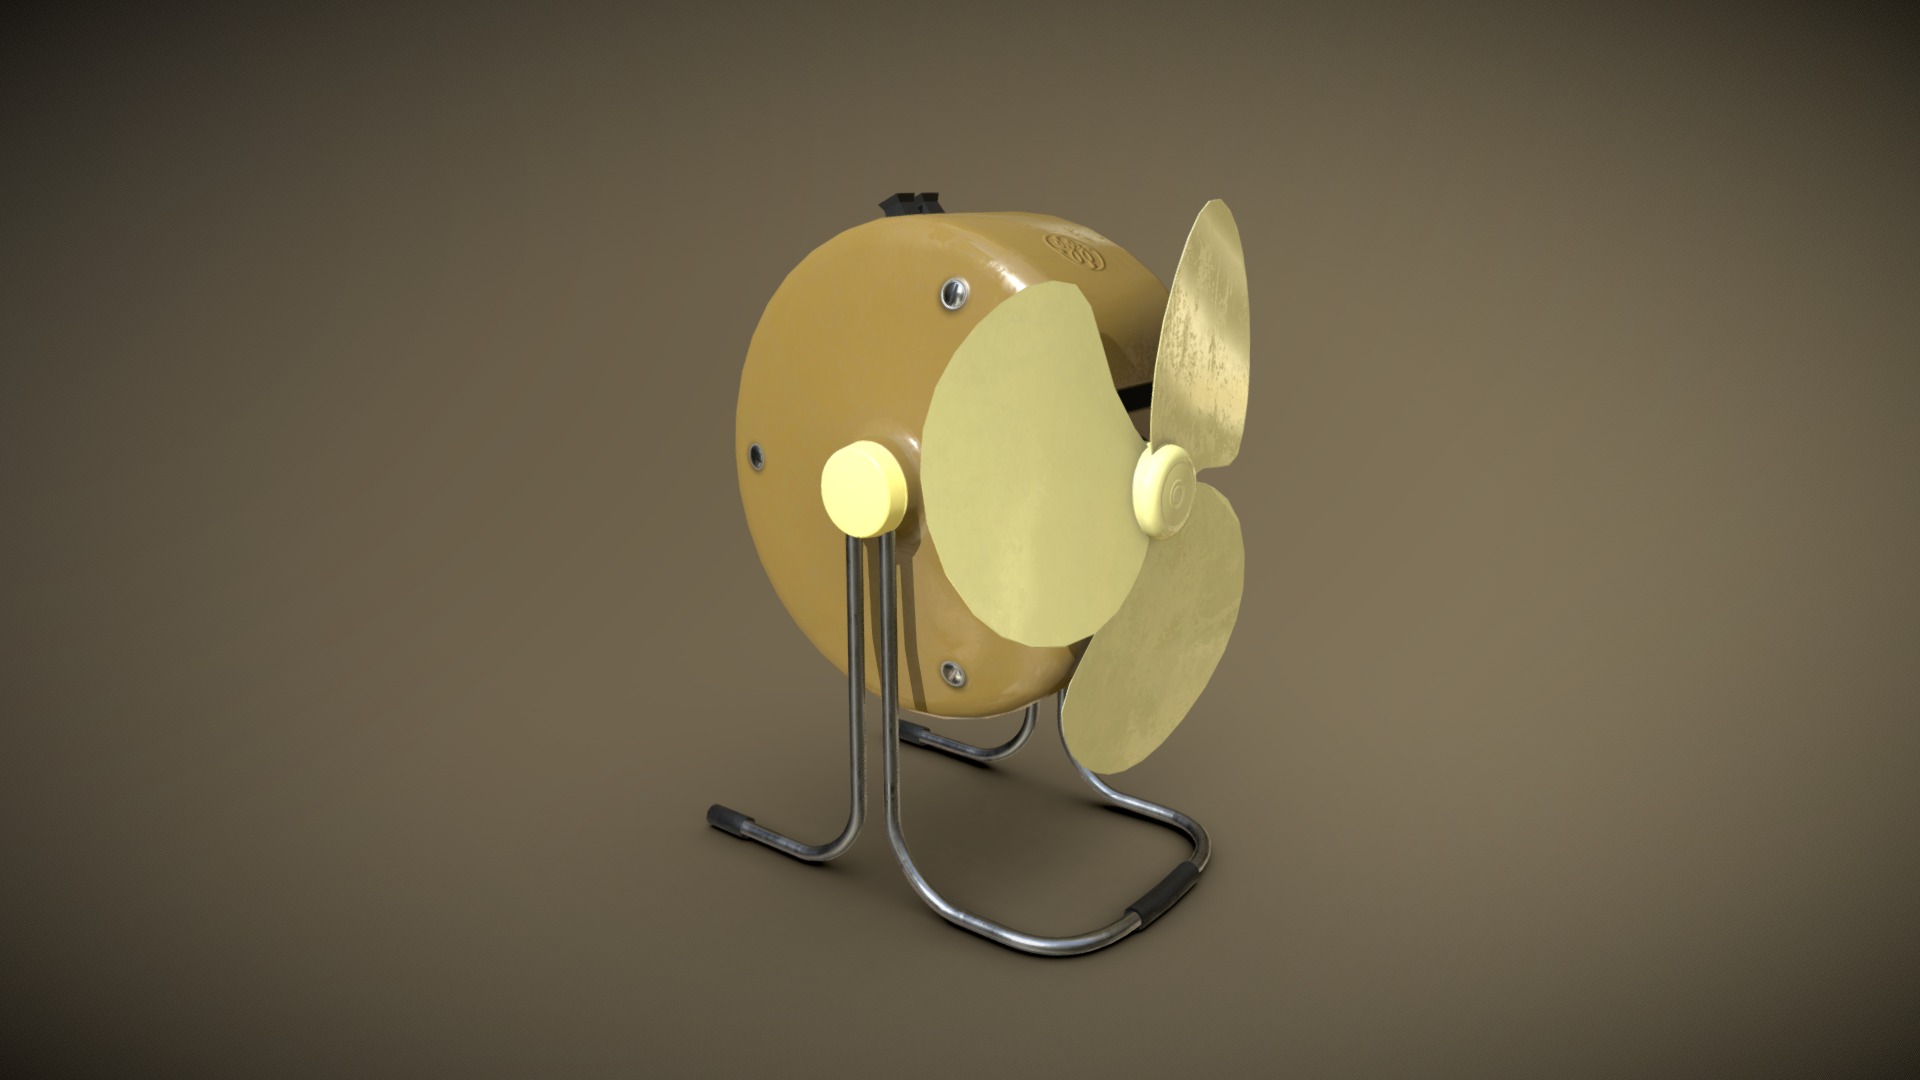 3D model Desktop fan 7 of 10 - This is a 3D model of the Desktop fan 7 of 10. The 3D model is about a light bulb with a face.